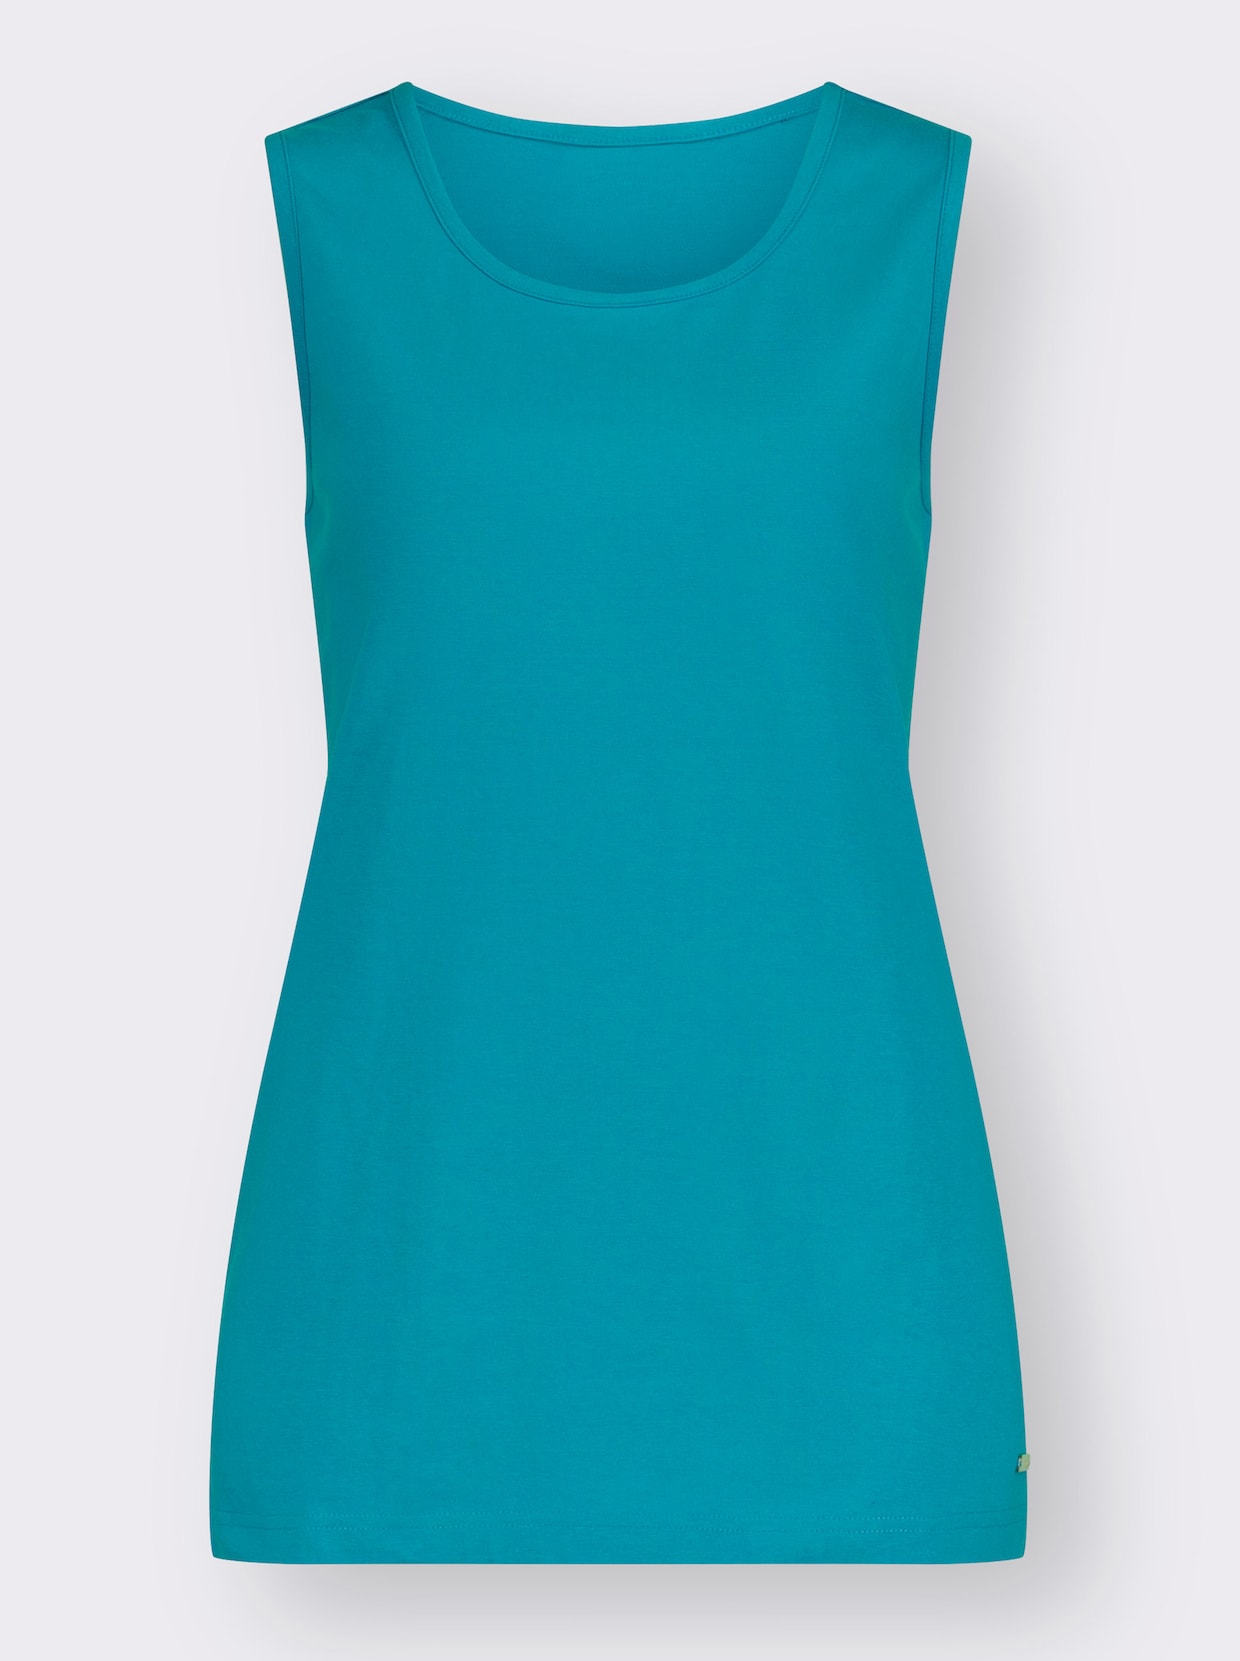 Shirttop - turquoise